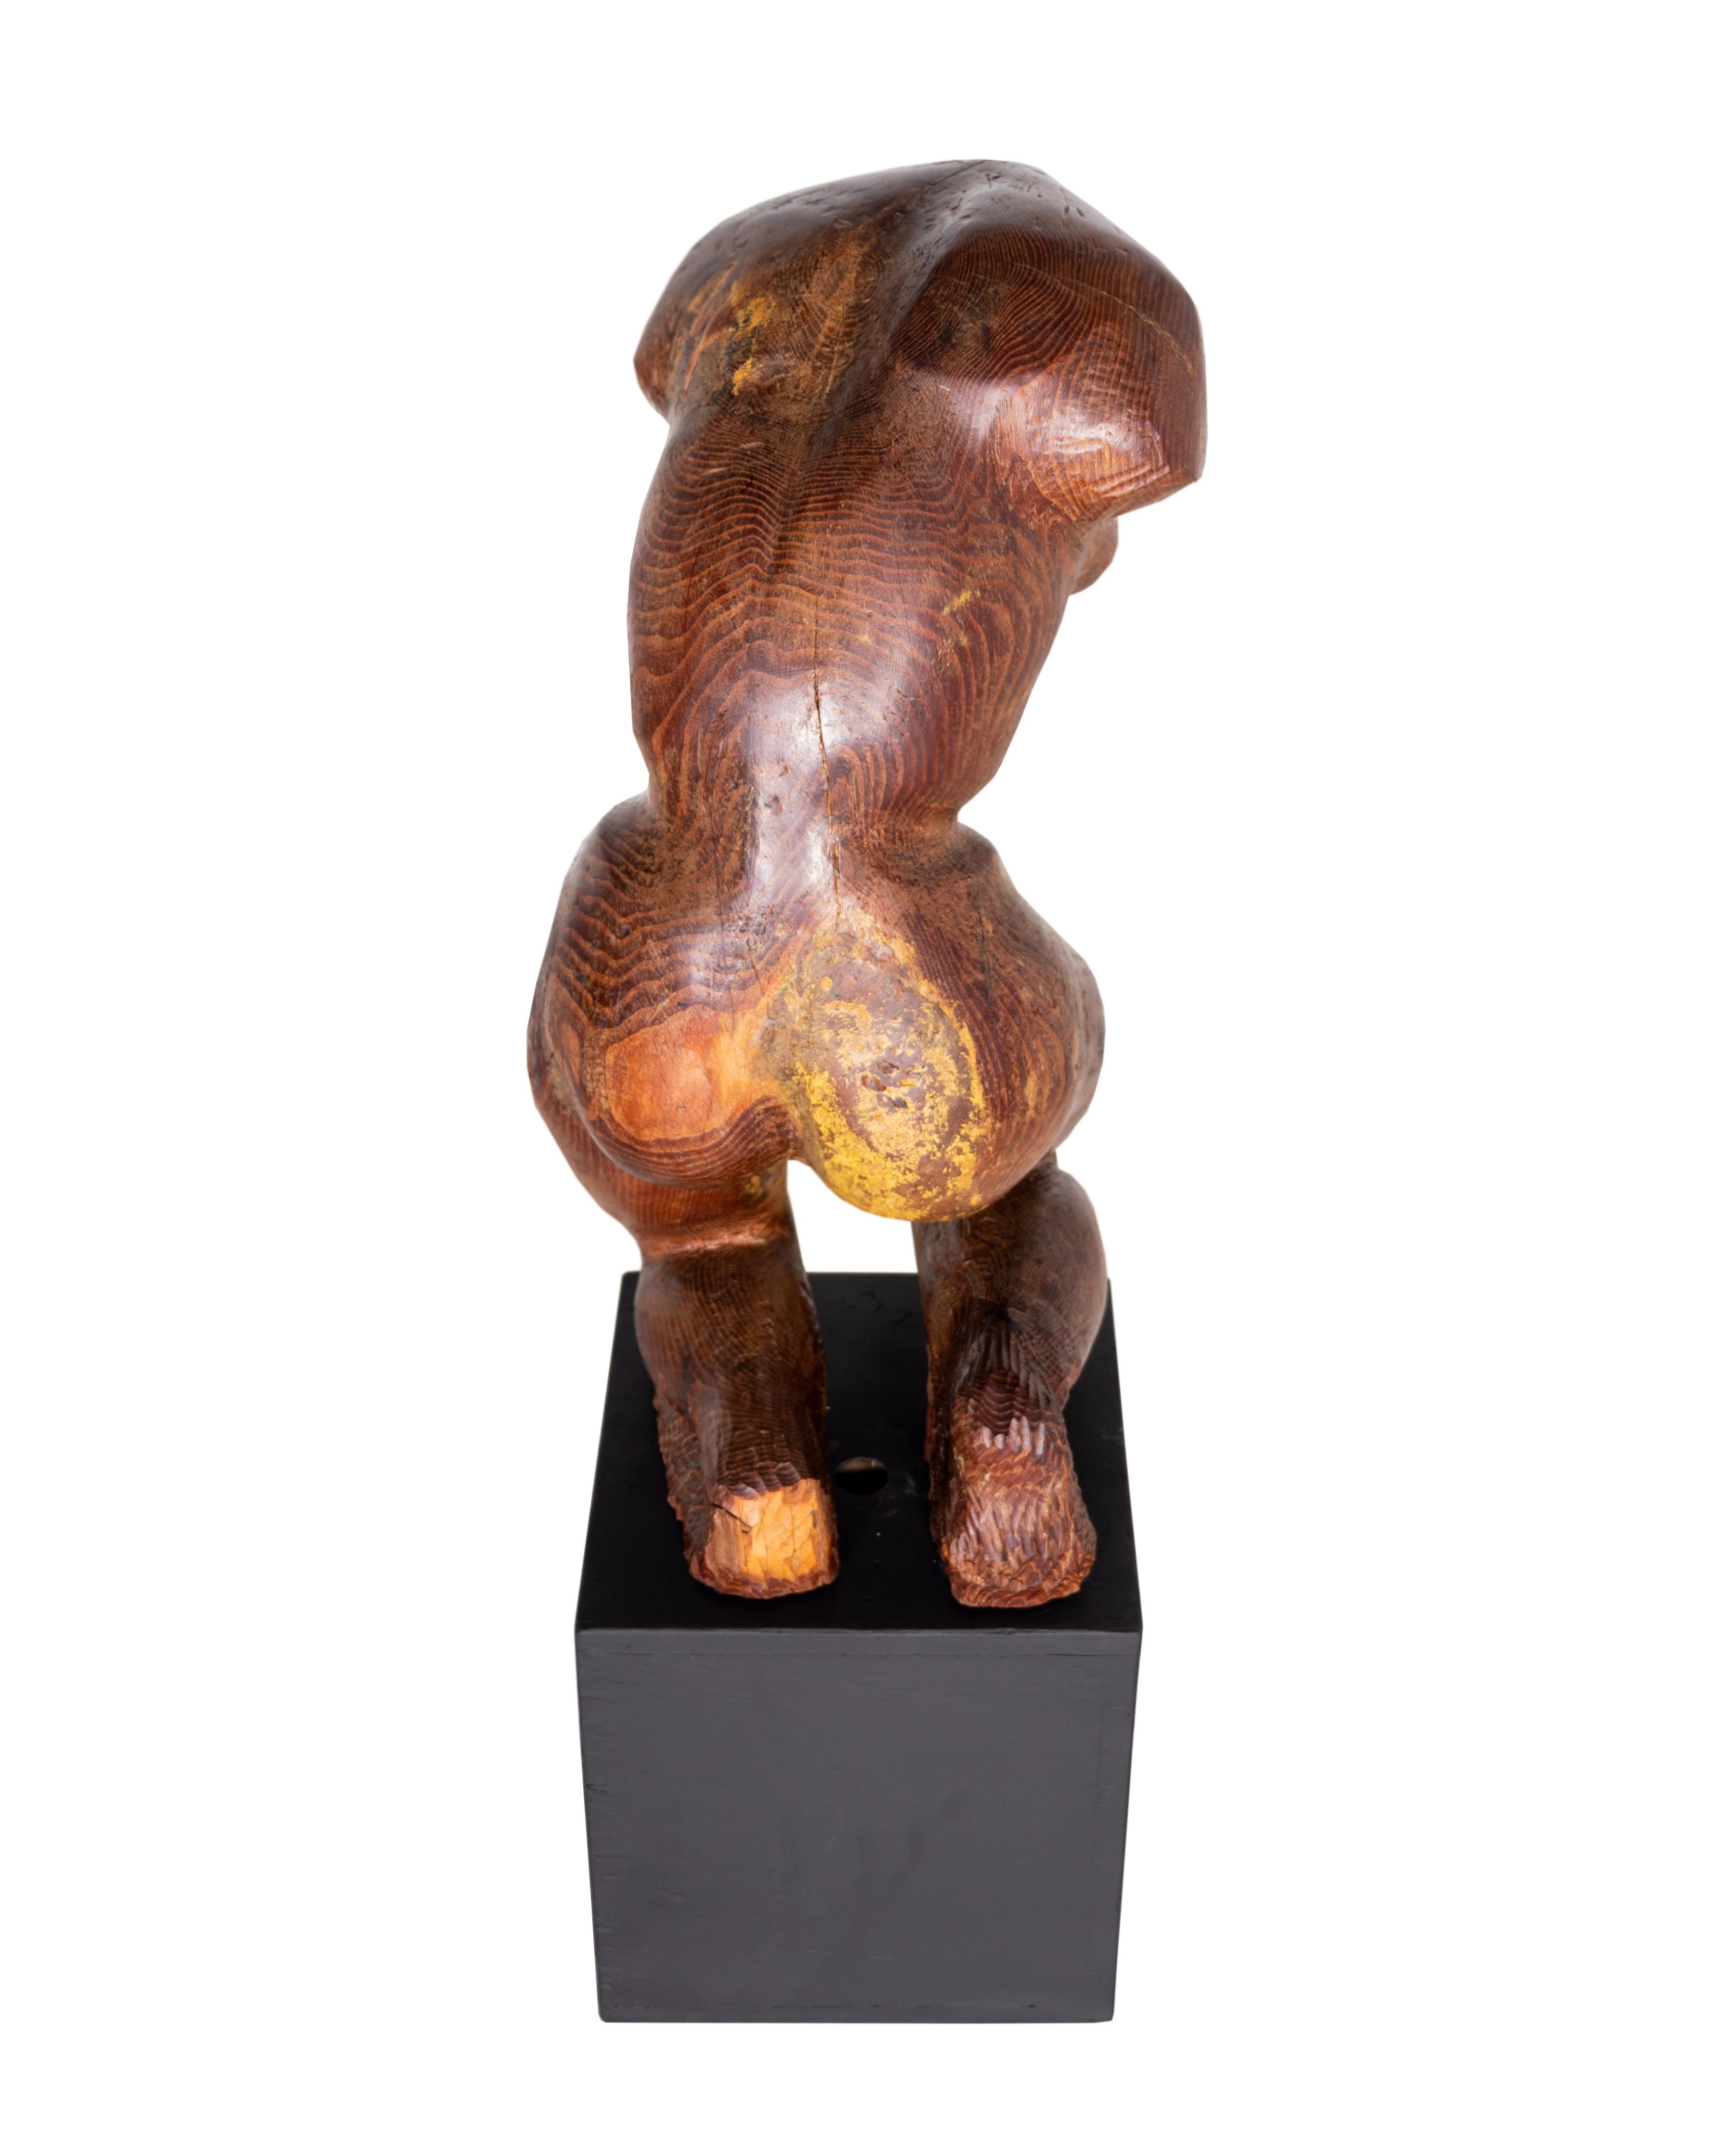 Carved wood female nude torso sculpture artist unknown. In my organic, contemporary, vintage and mid-century modern style.

Curated for our one of a kind line, Le Monde. Exclusive to Brendan Bass.